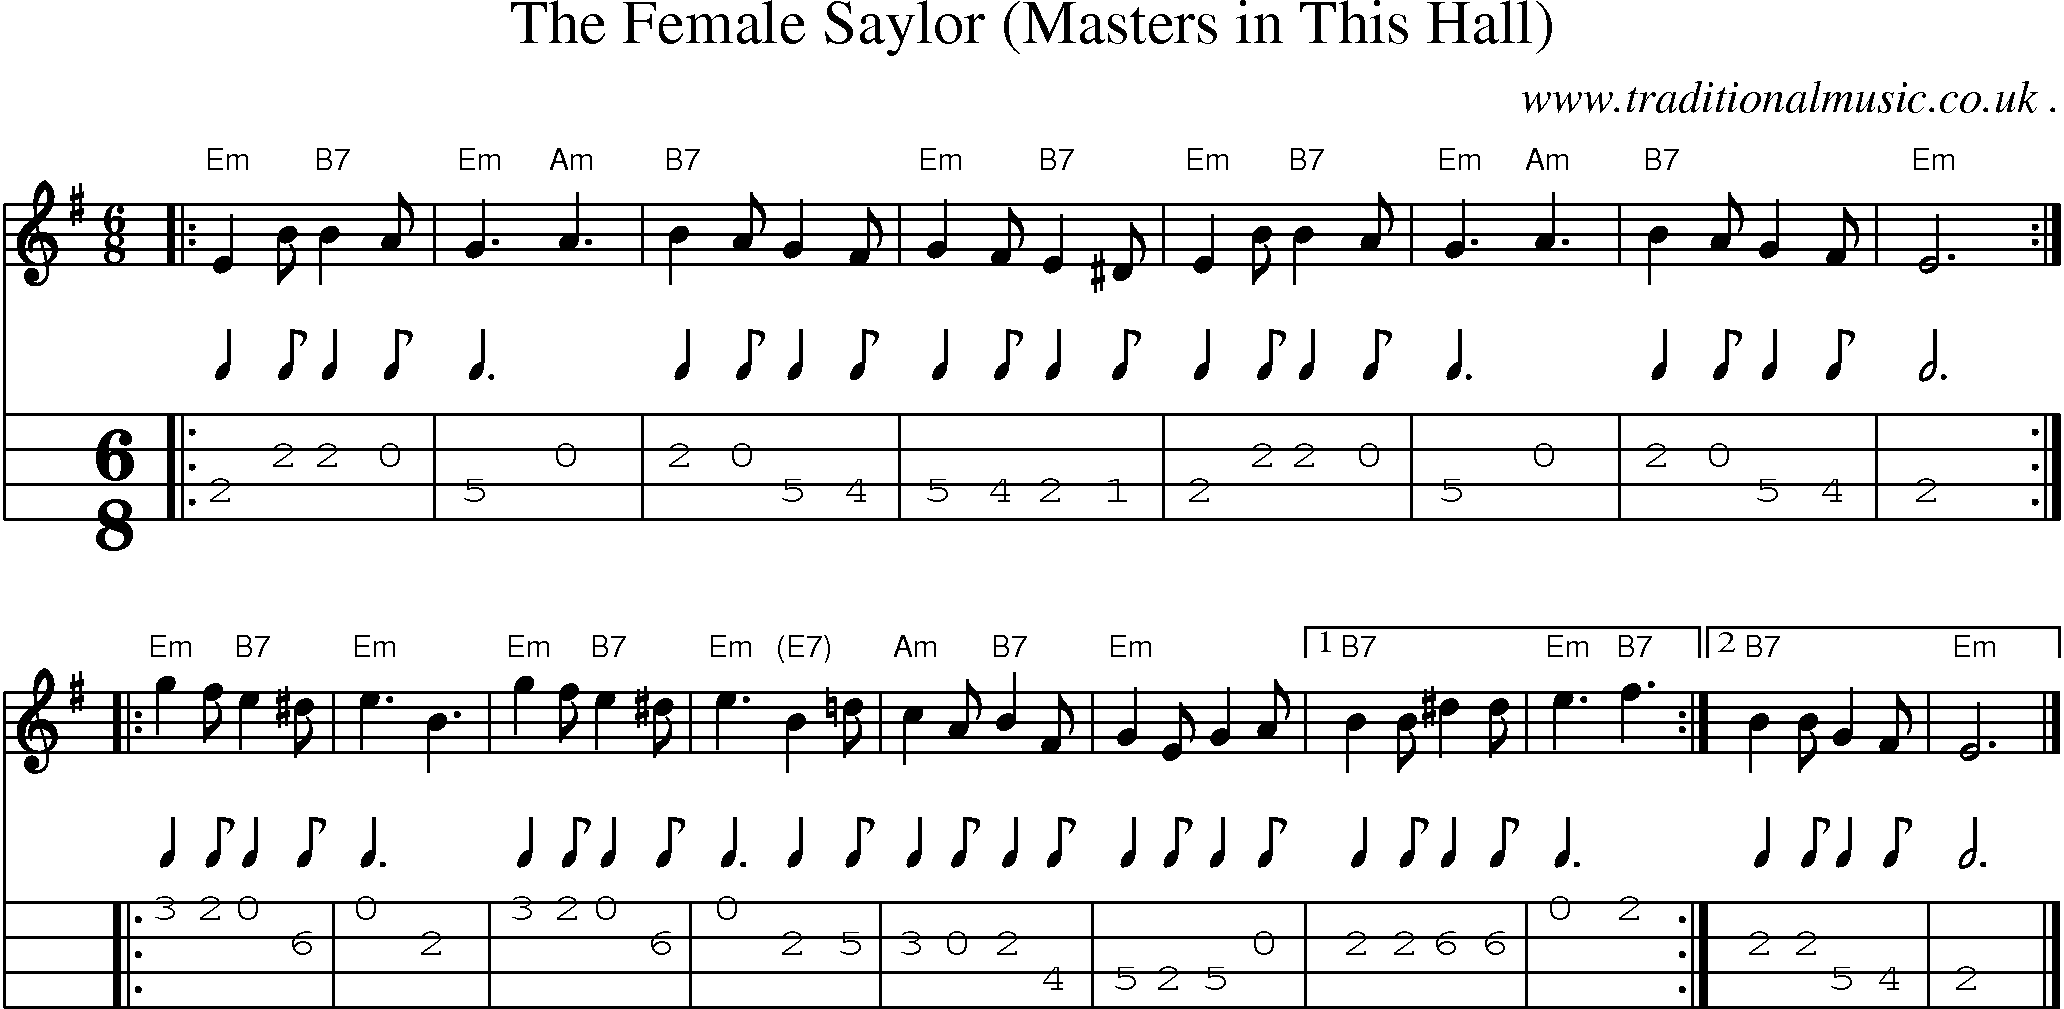 Sheet-music  score, Chords and Mandolin Tabs for The Female Saylor Masters In This Hall